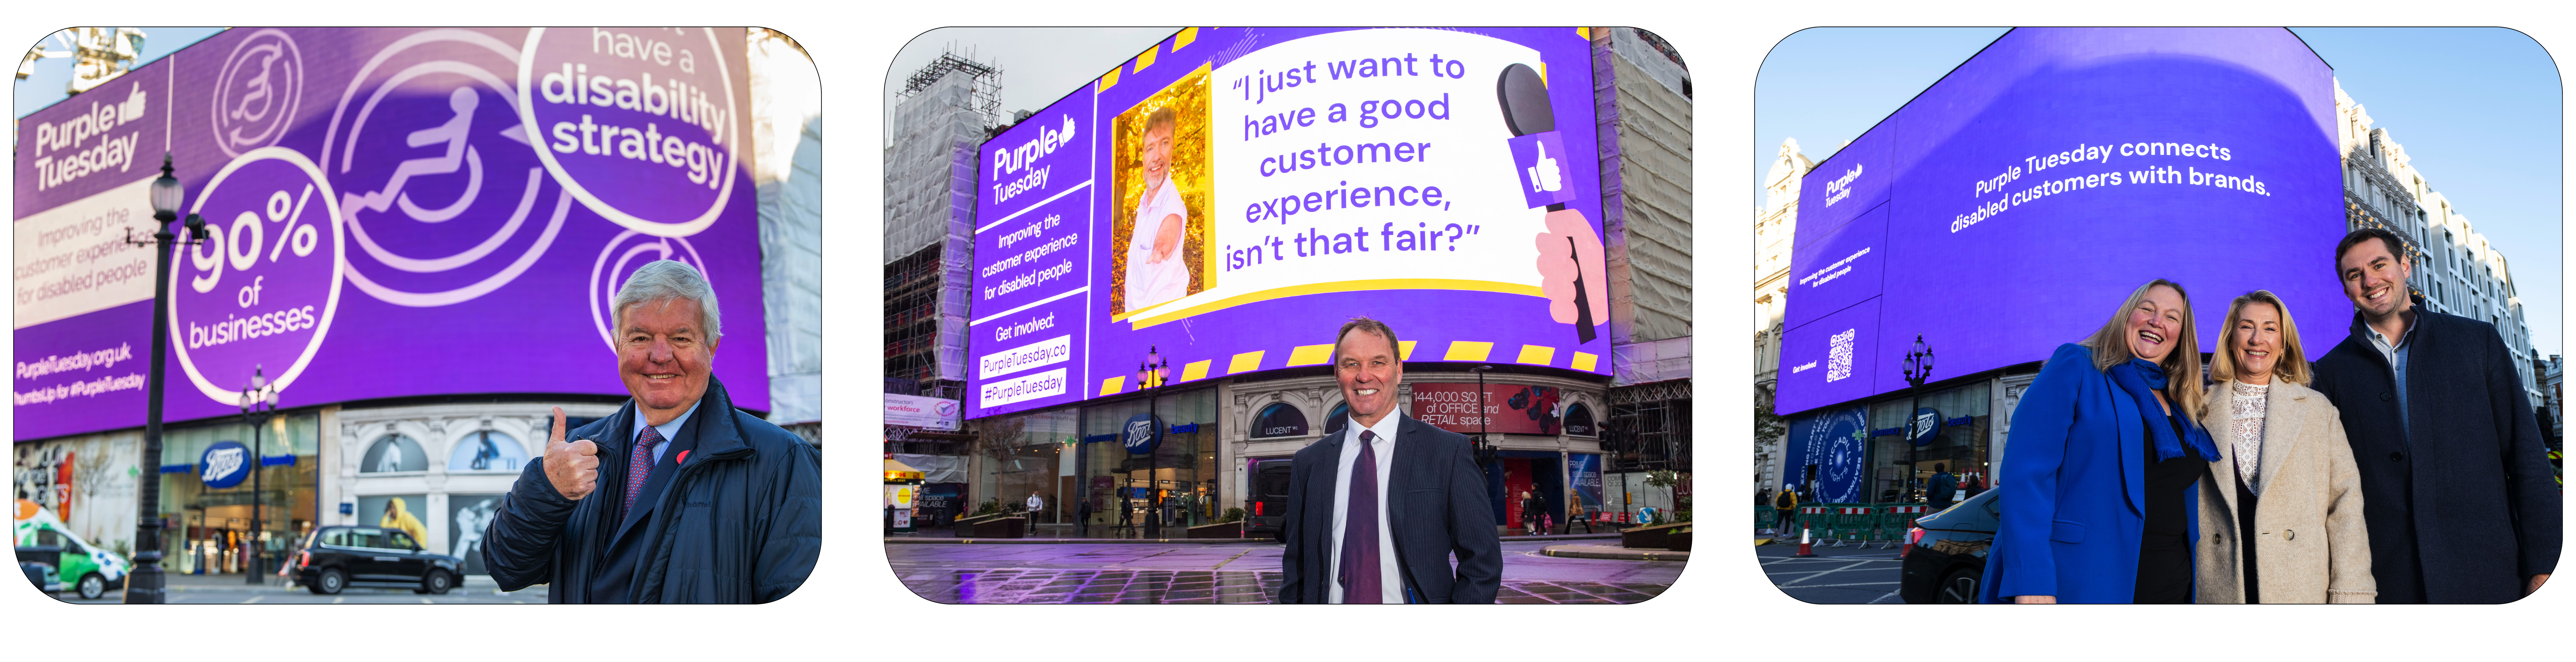 Allwyn employees gathered joyfully in front of the Piccadilly Lights, celebrating Purple Tuesday with vibrant Purple Tuesday Branding displayed